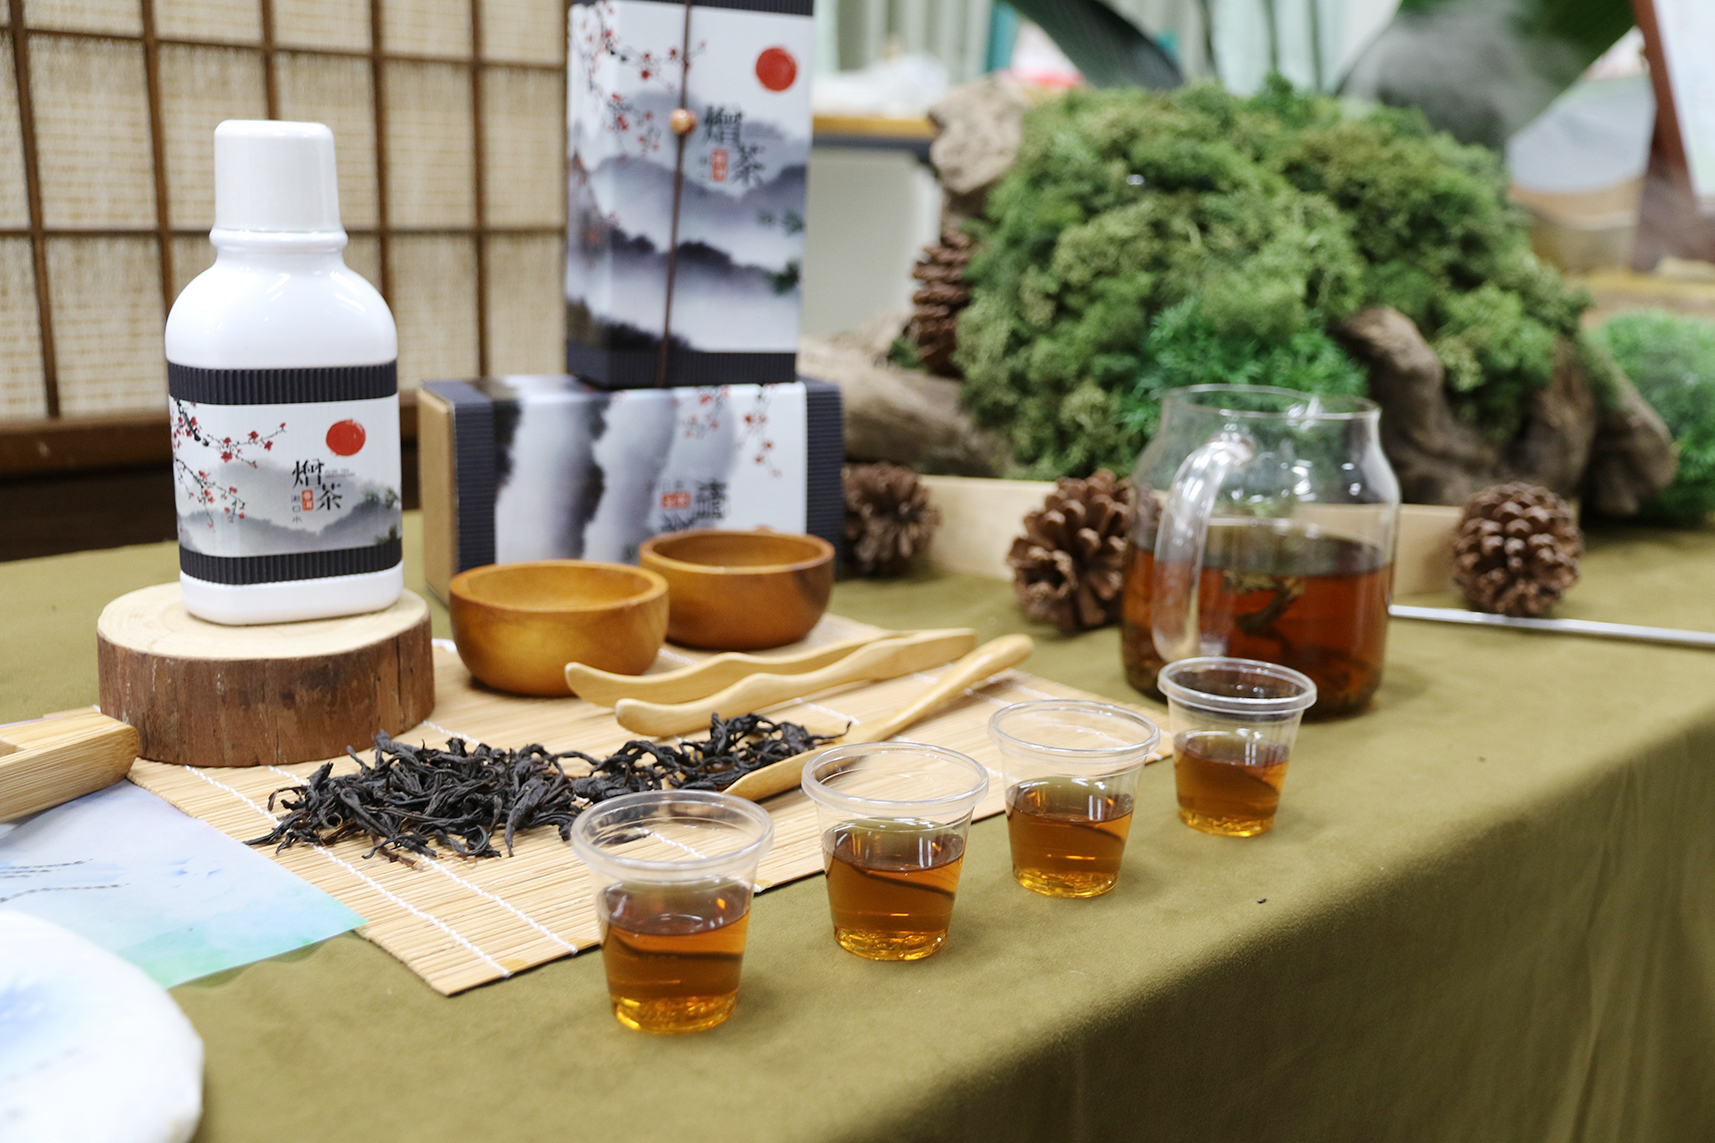 Puerh Tea Liquid Preventing Tooth Decay, Teaghrelin Helping Metabolism and Muscle Growth, National Chung Hsing University Develops Two New Tea Products for the First Time in Taiwan